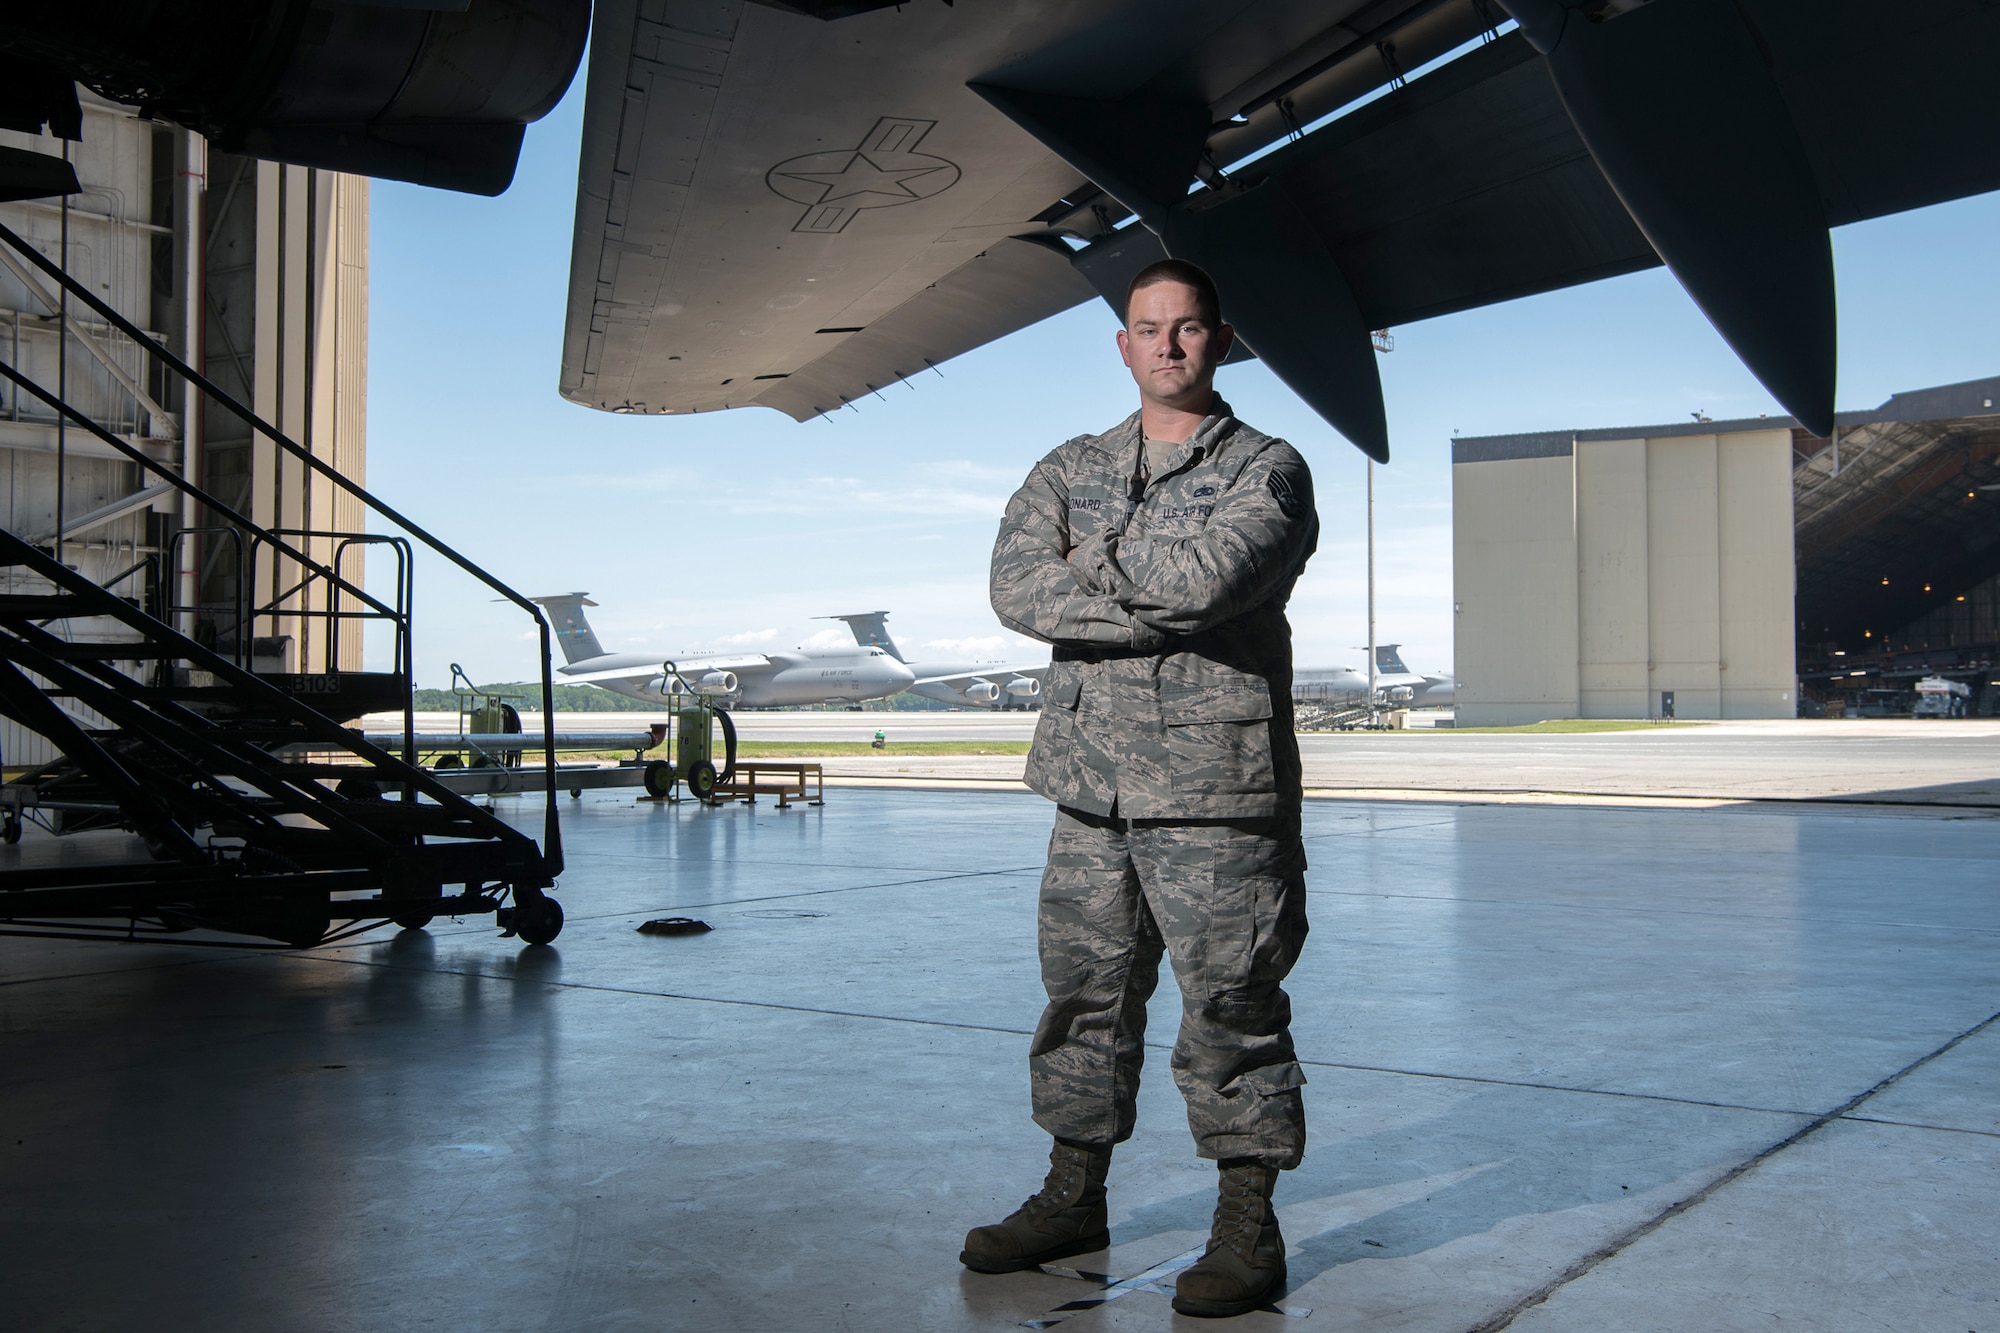 Staff Sgt. Lawrence Leonard, 736th Aerial Maintenance Squadron propulsion systems craftsman, stands underneath the wing of a C-17 Globemaster III June 26, 2019, at Dover Air Force Base, Del. Certain maintenance is performed inside a hangar to protect aircraft components from inclement weather. (U.S. Air Force photo by Mauricio Campino)